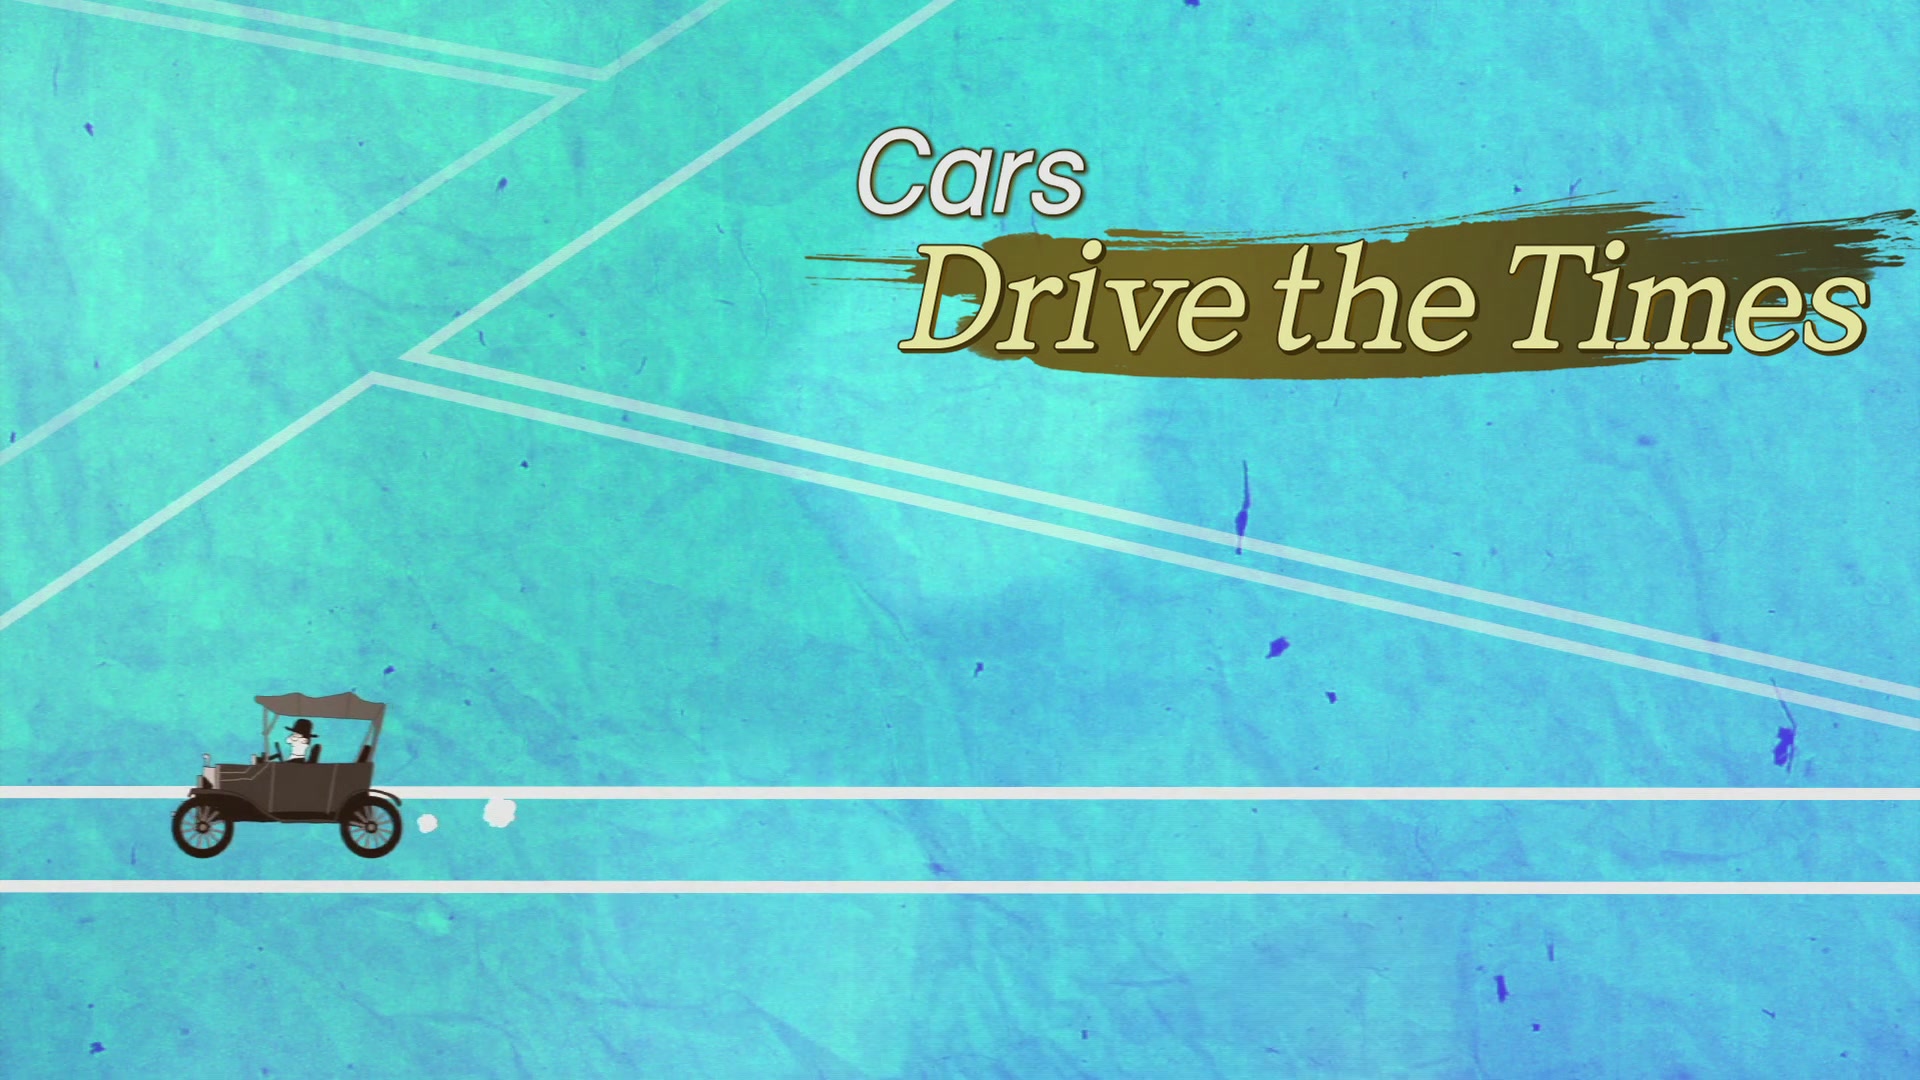 Cars, Drive the Time